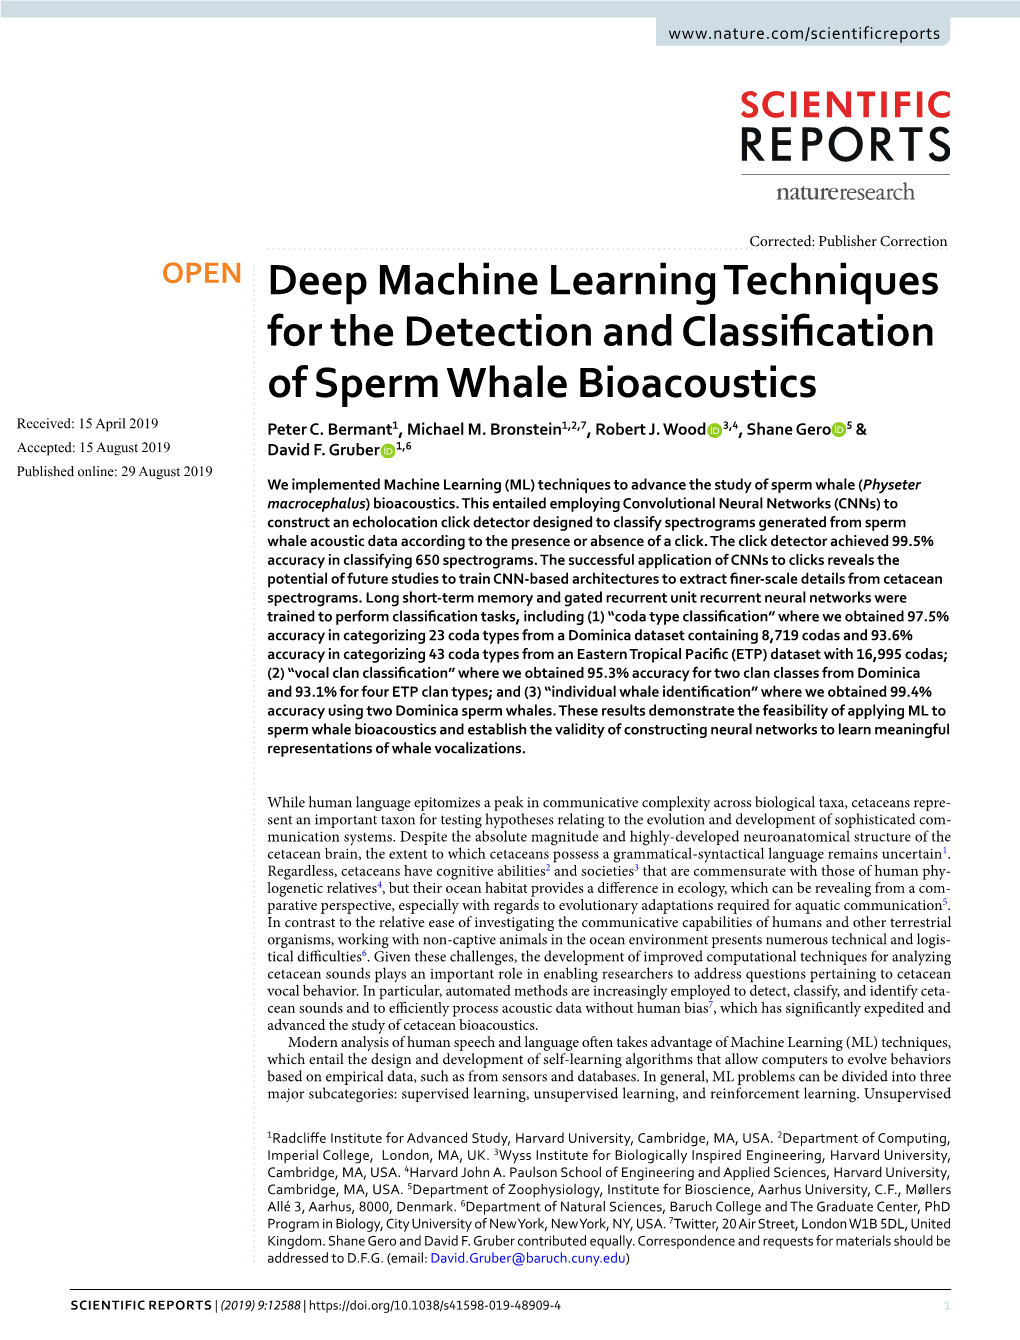 Deep Machine Learning Techniques for the Detection and Classification